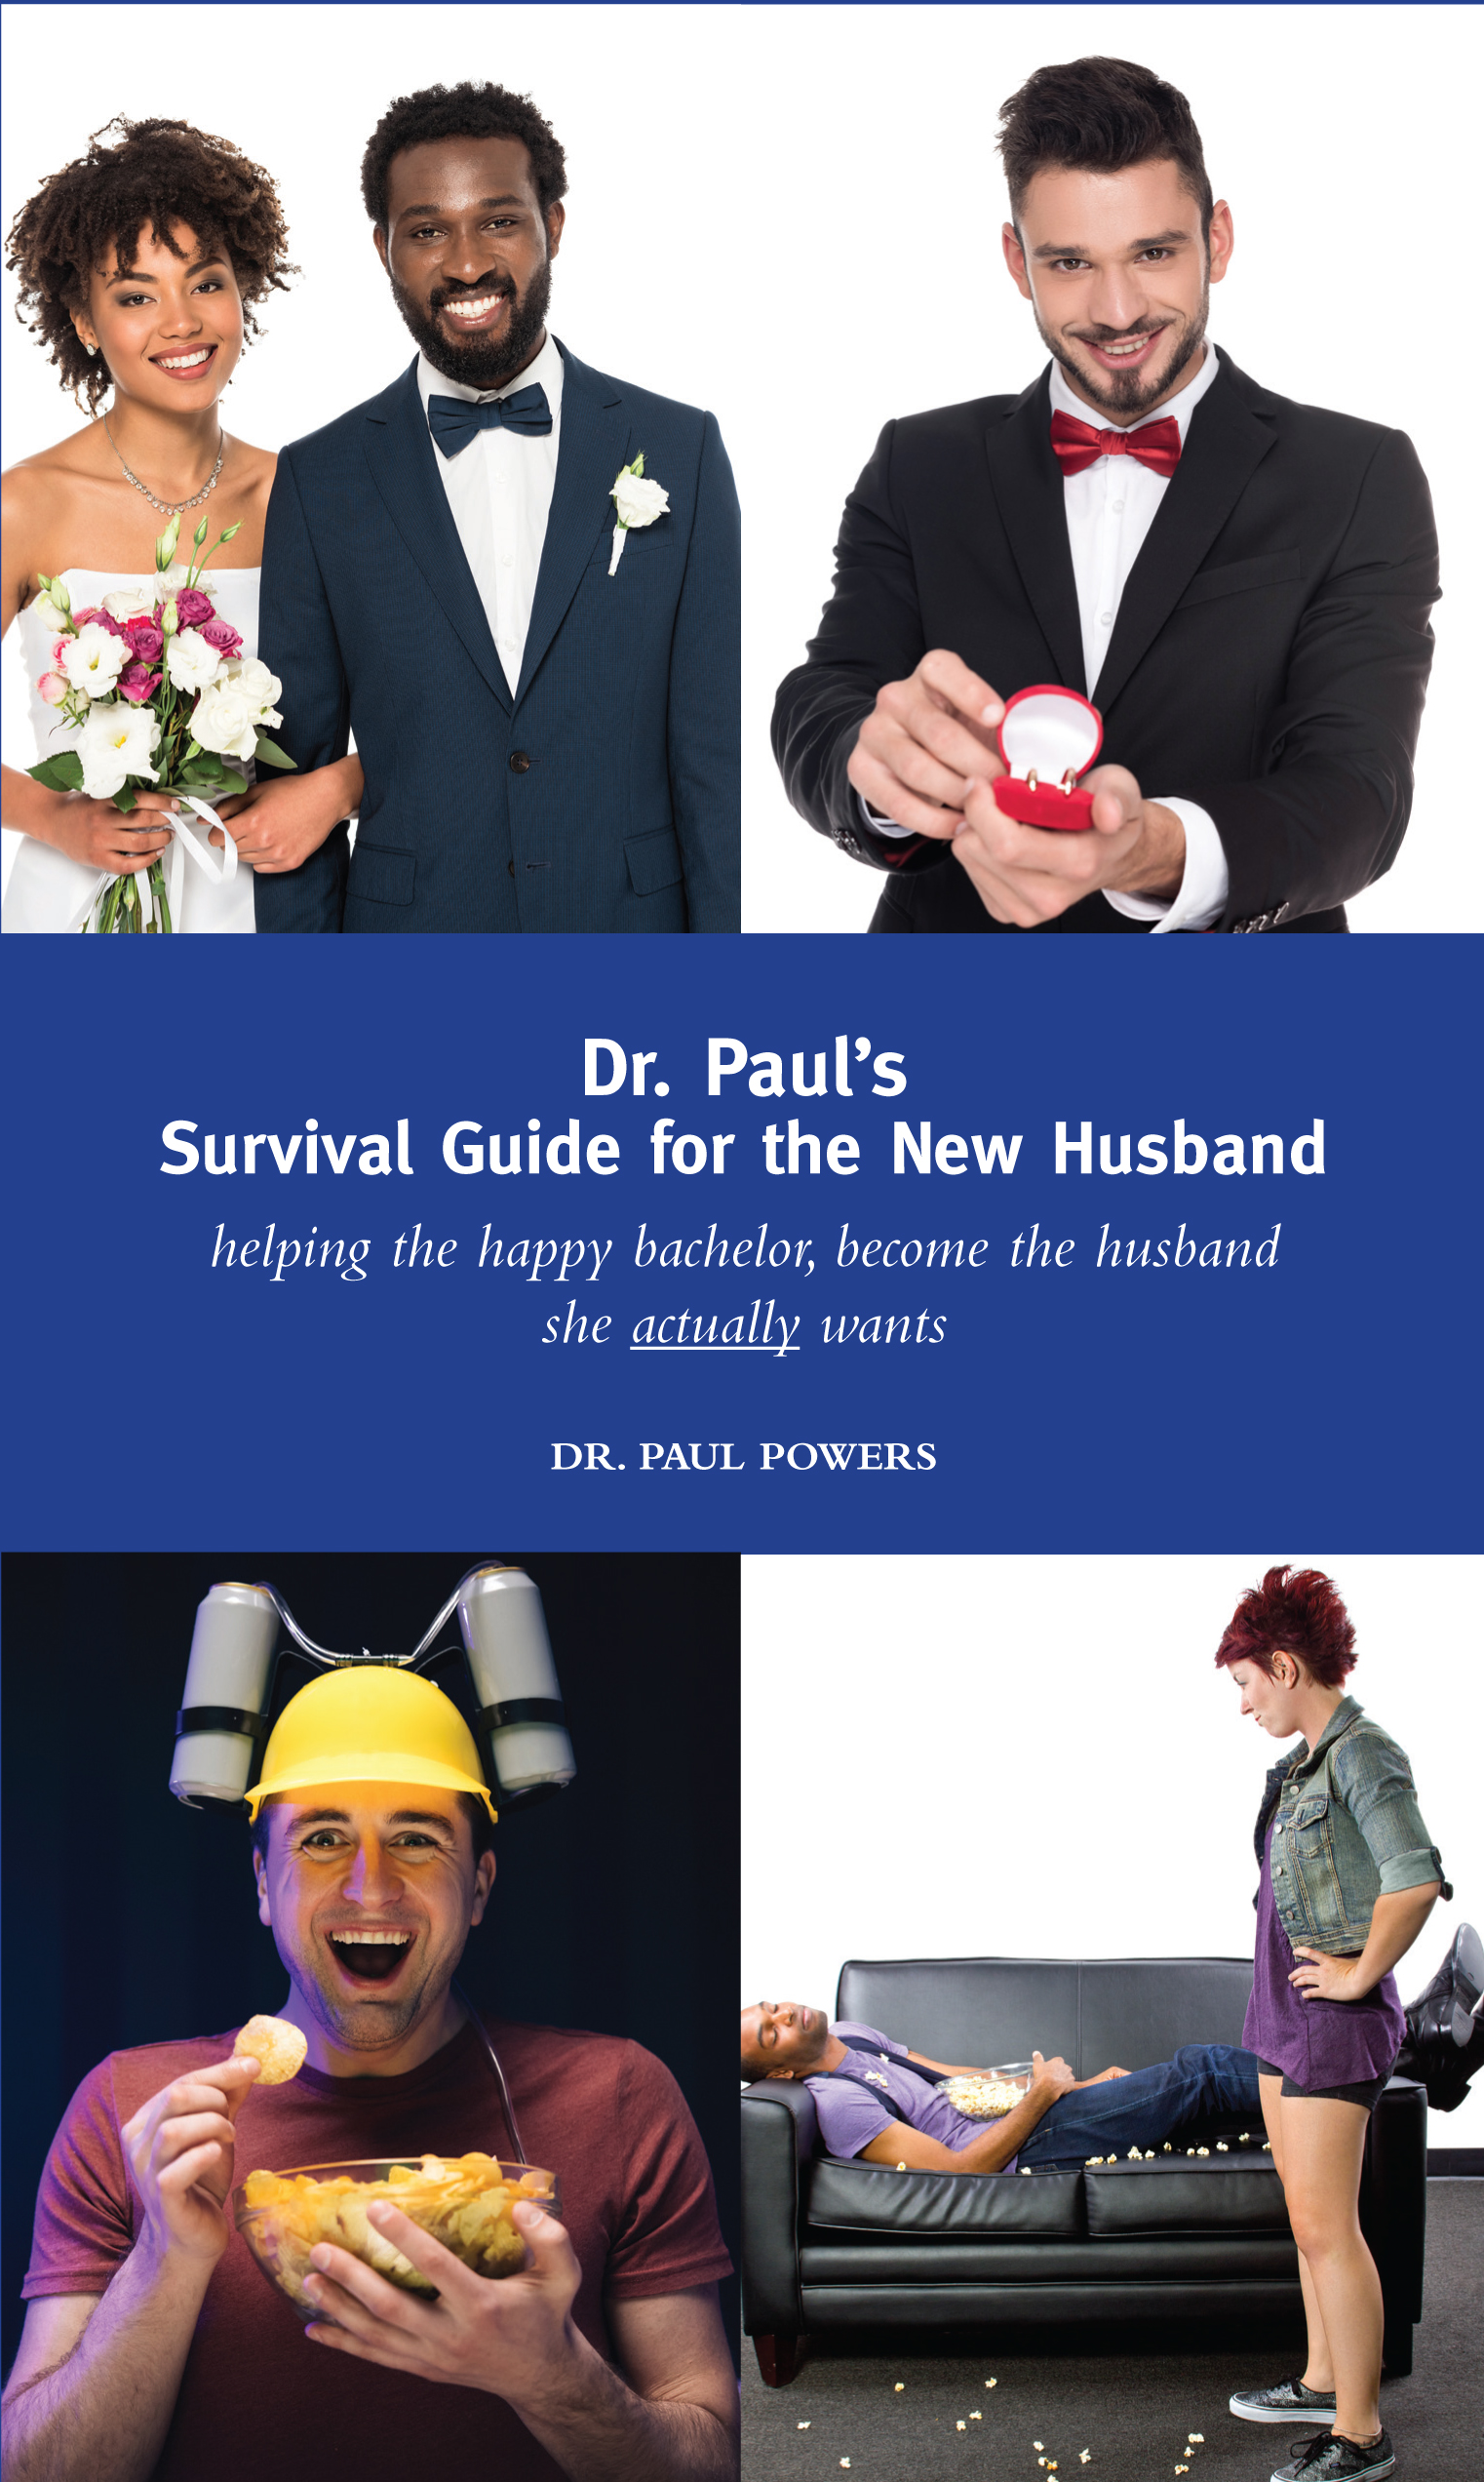 Dr. Paul’s Survival Guide for the New Husband: Helping The Happy Bachelor Become the Husband She Actually Wants